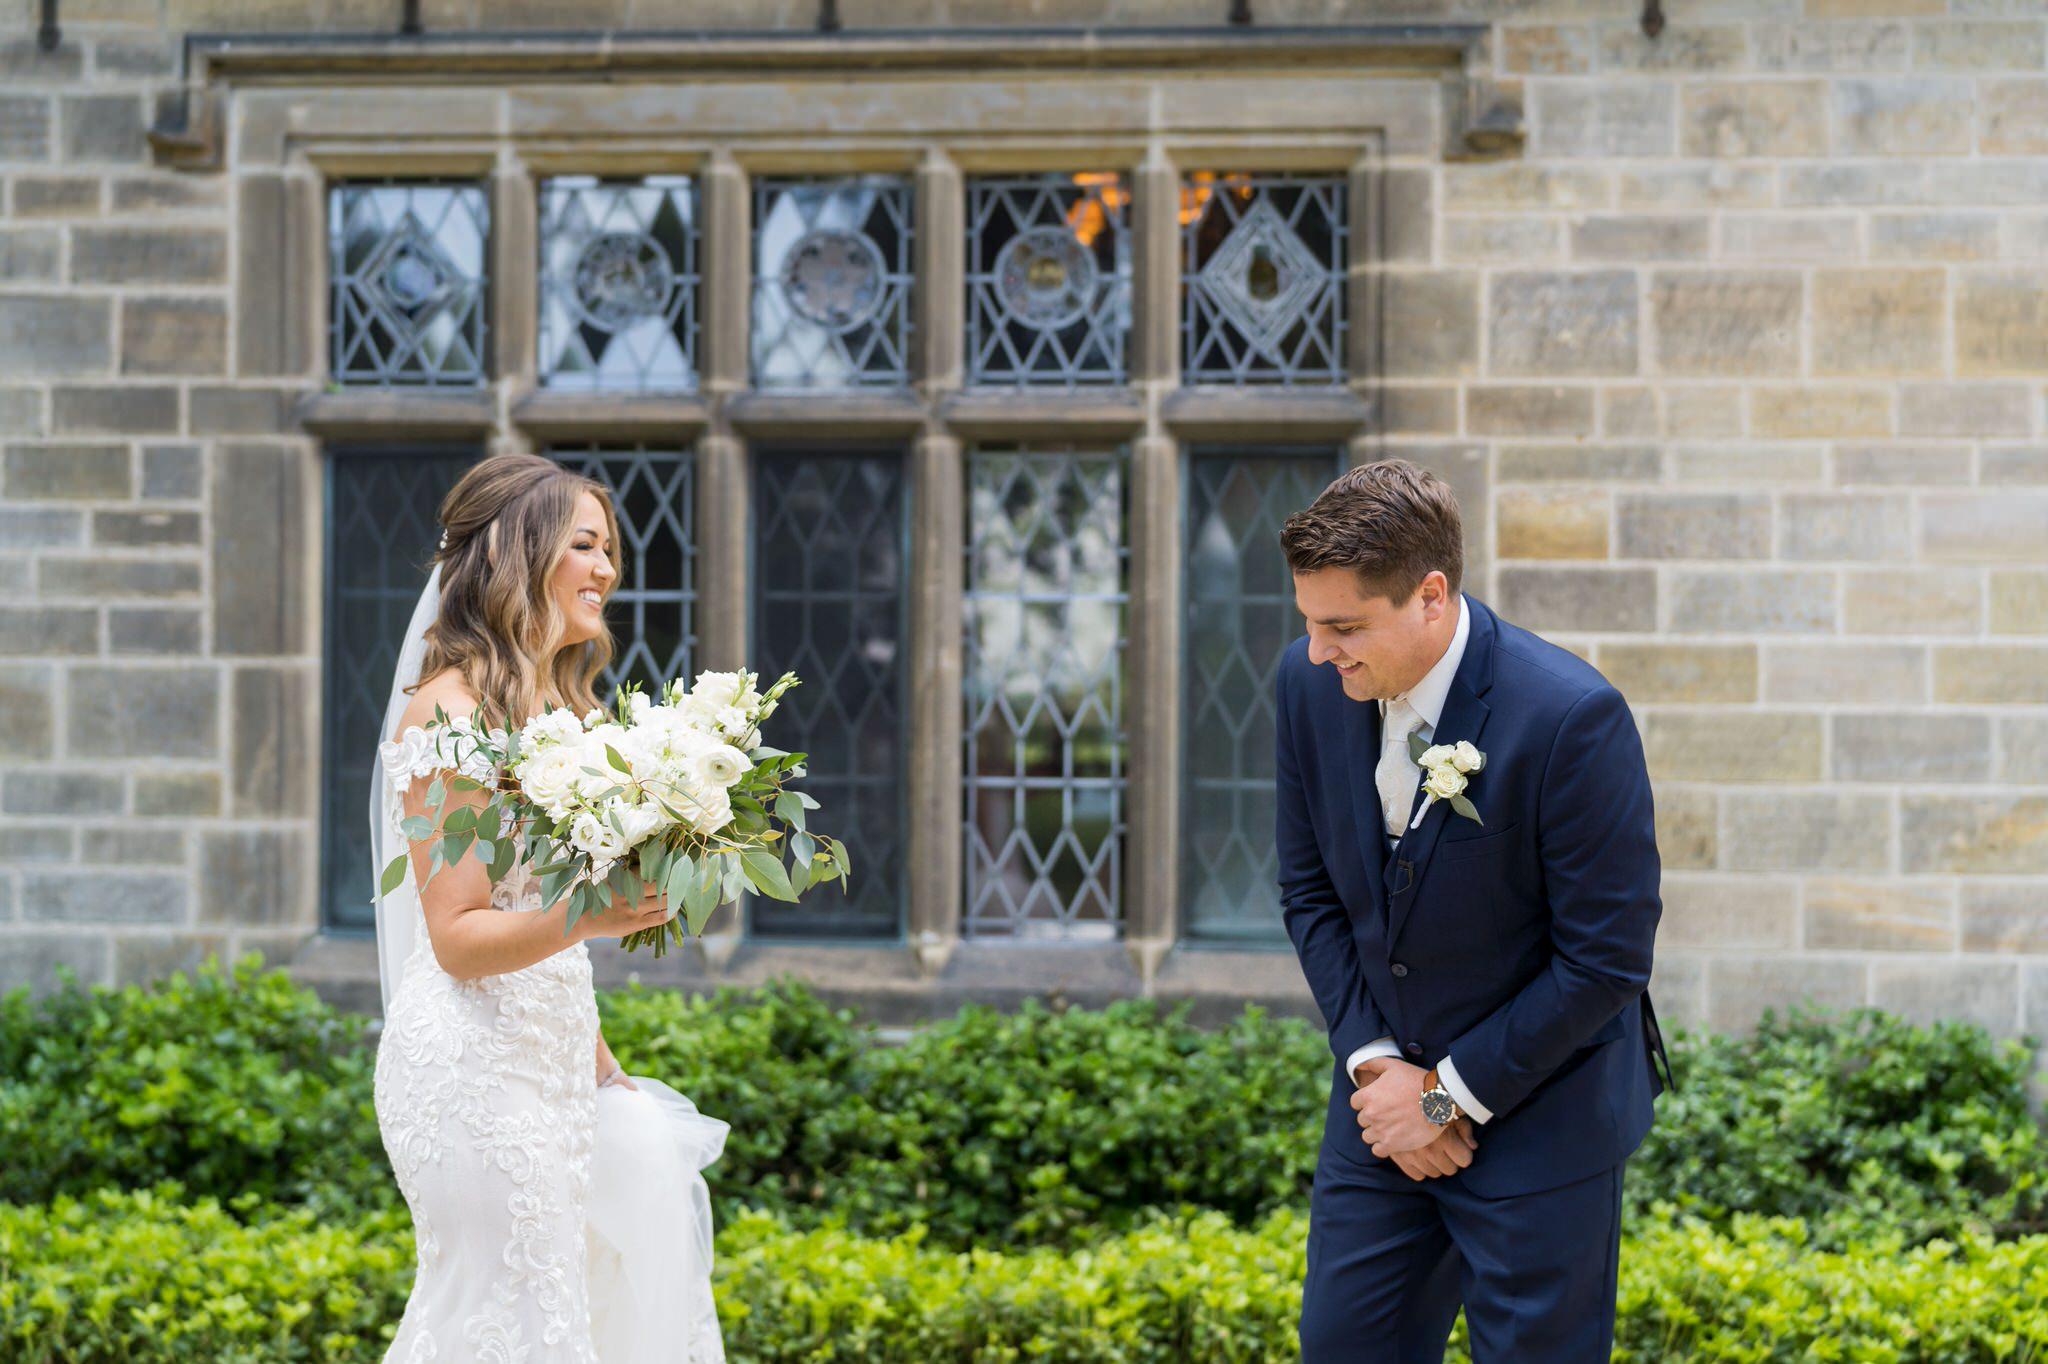 Groom sees the bride for the first time, a first look, and reacts, at the Edsel Ford House